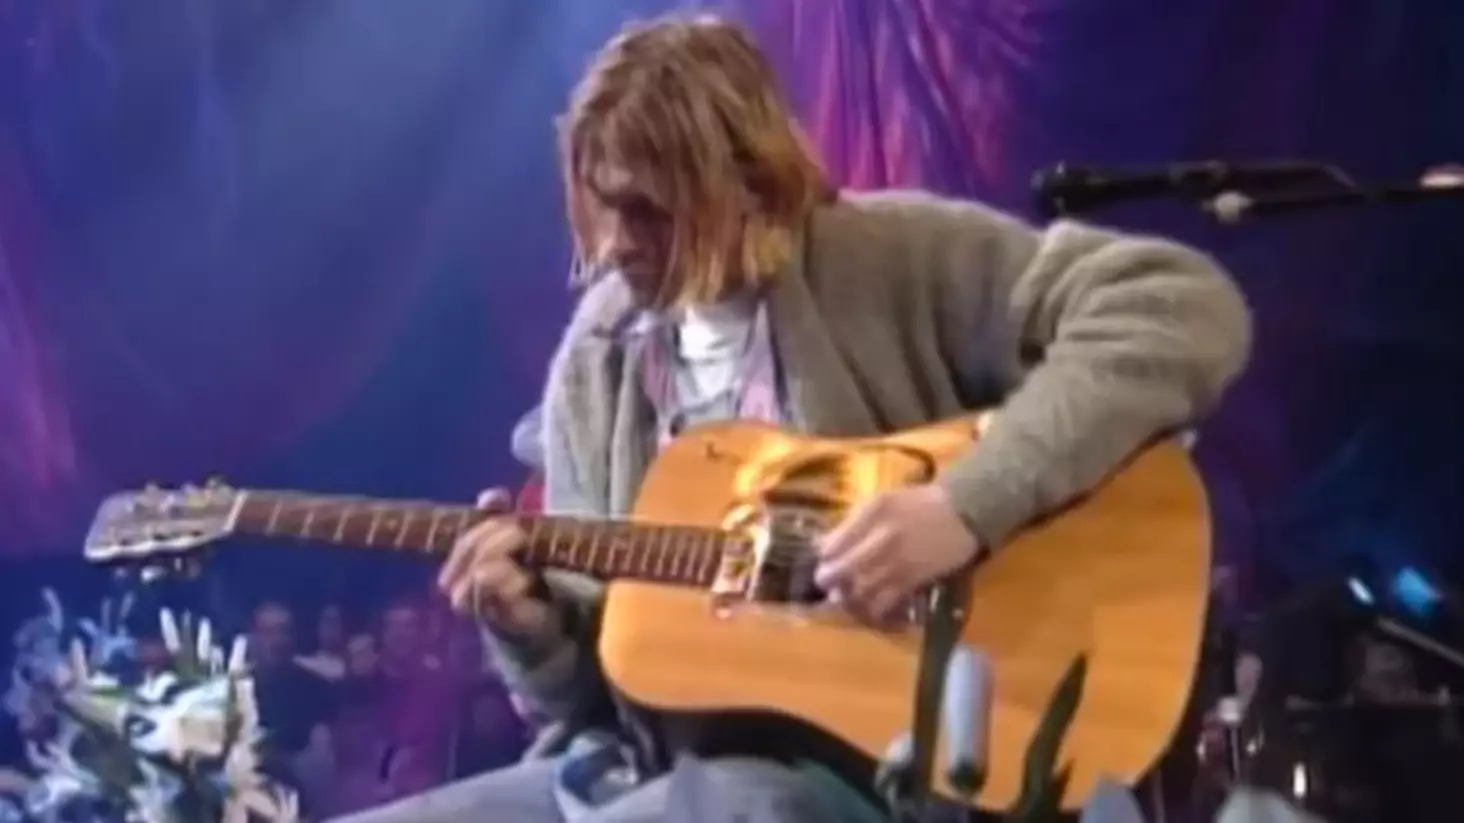 Kurt Cobain's Unwashed Cardigan From 1993 Unplugged Session Sells For $489,000